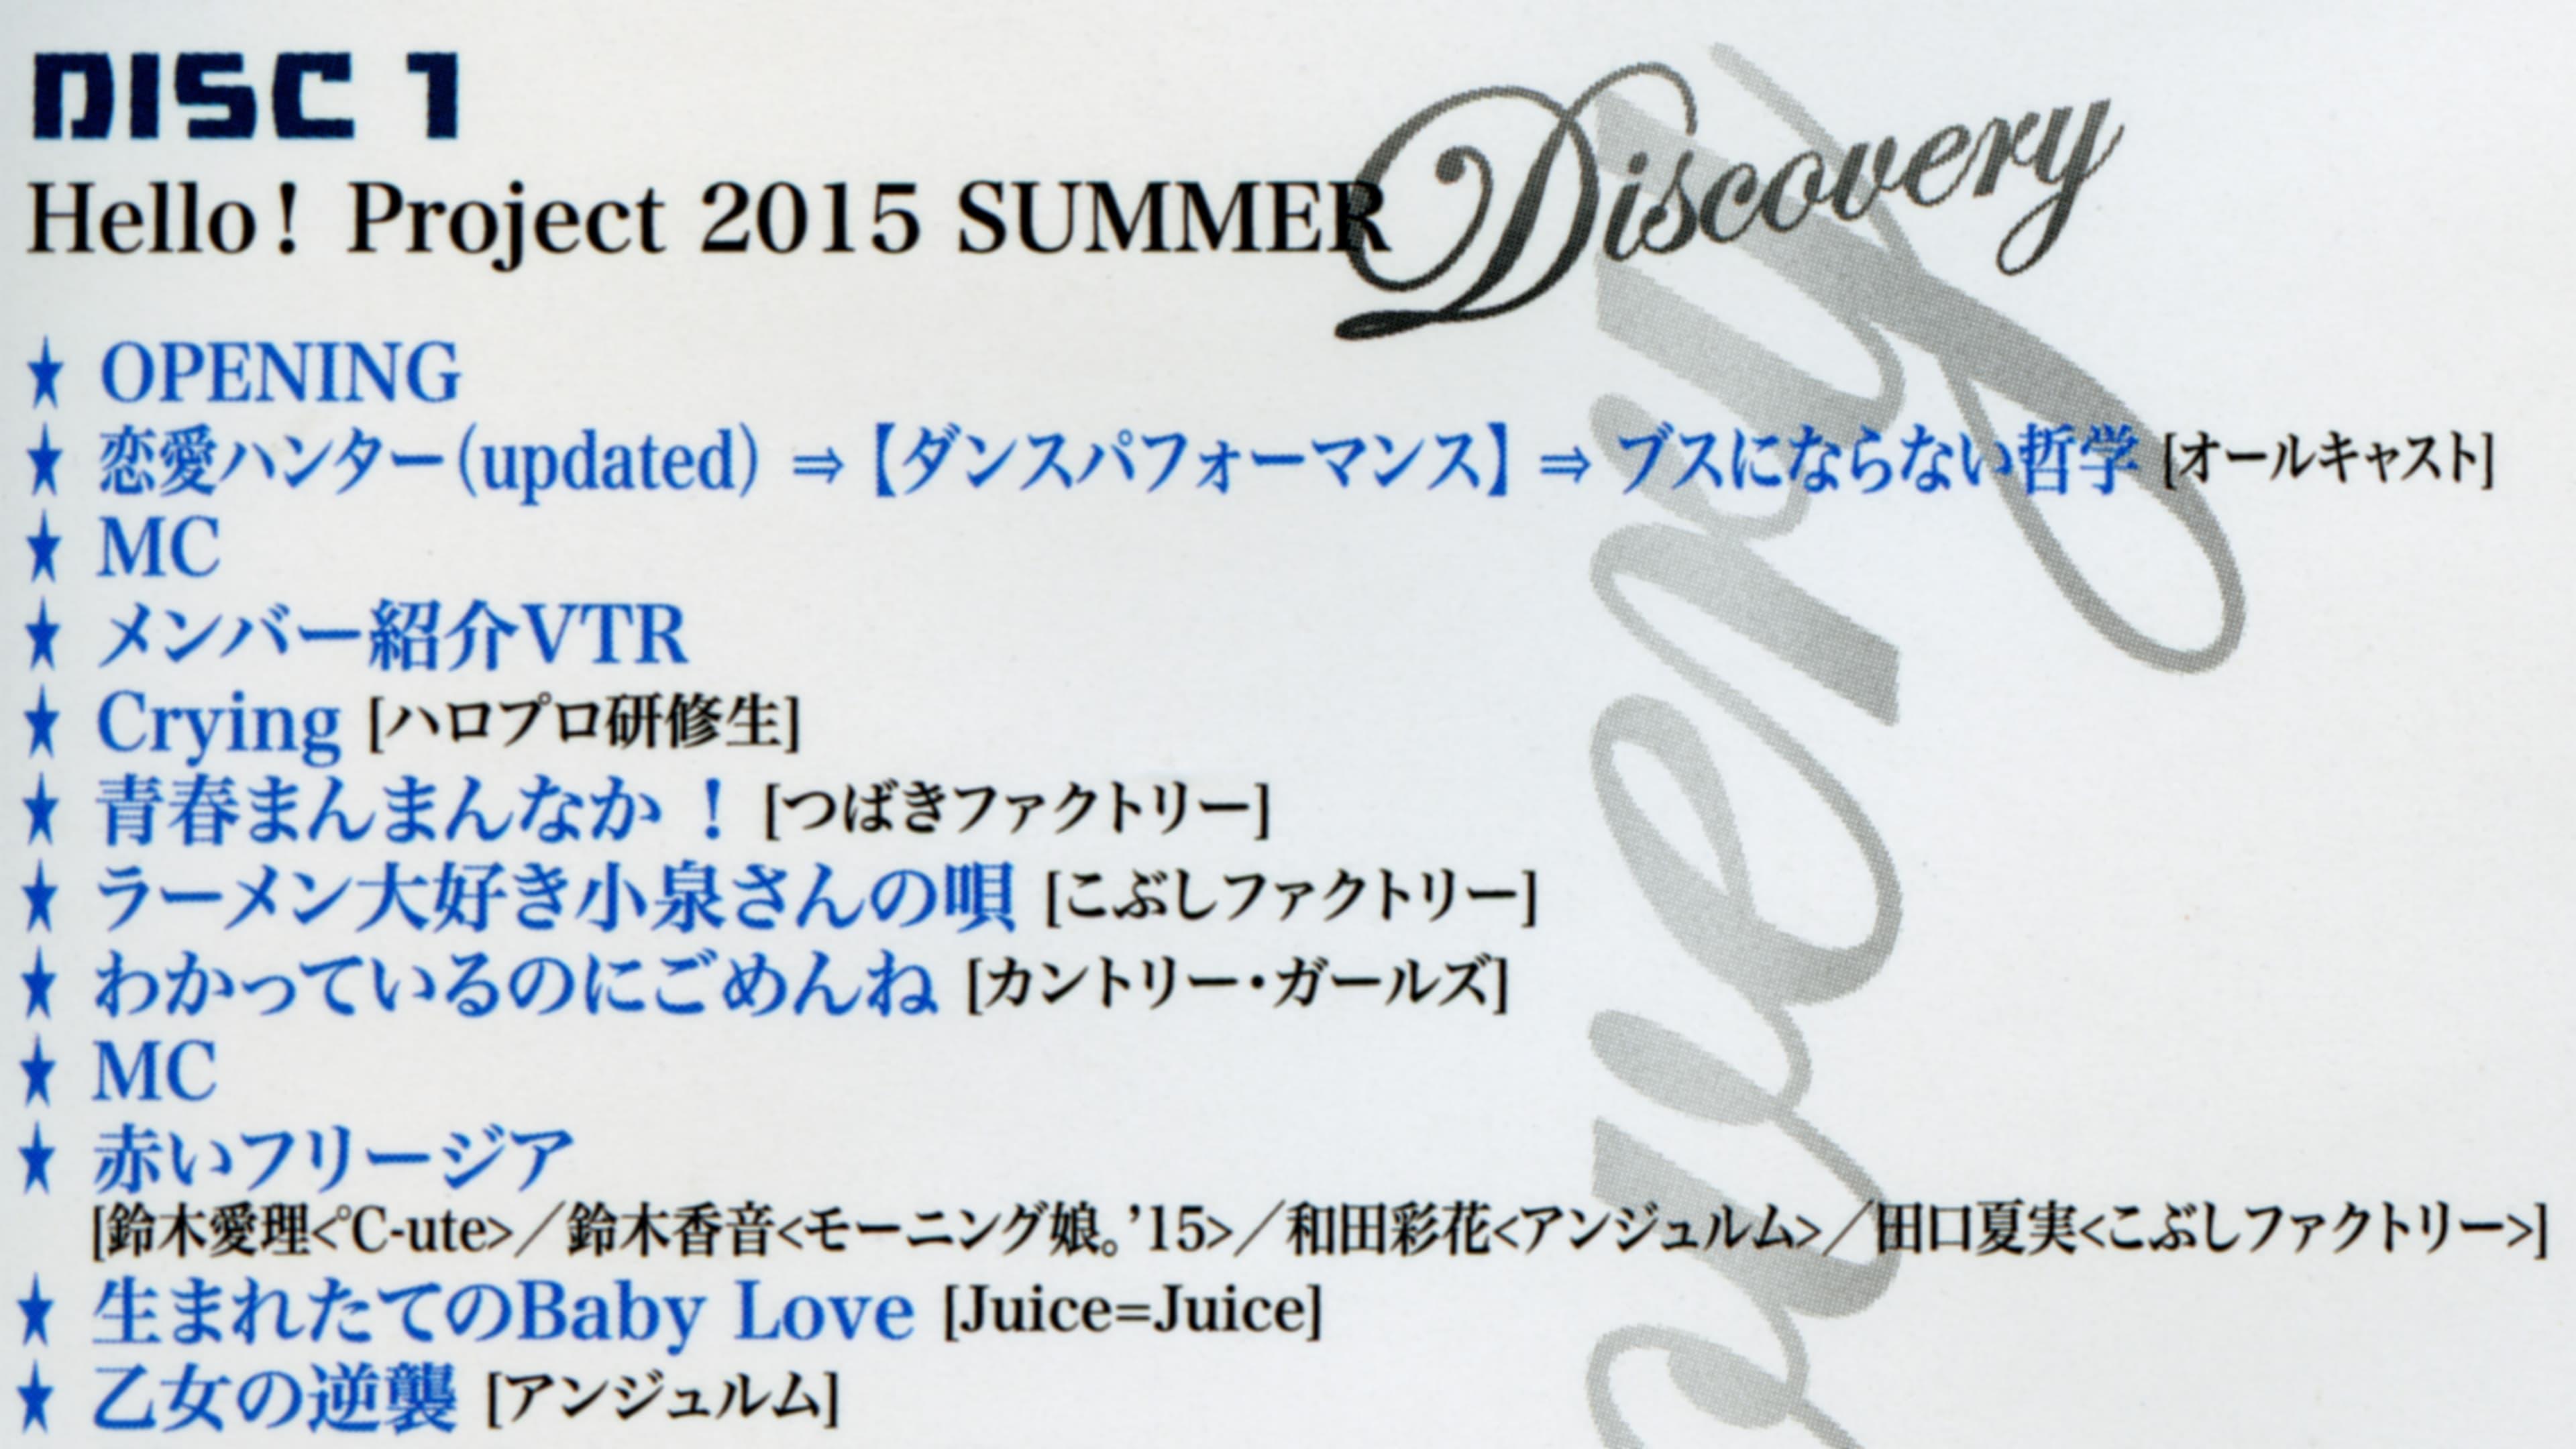 Hello! Project 2015 Summer ~DISCOVERY~ backdrop